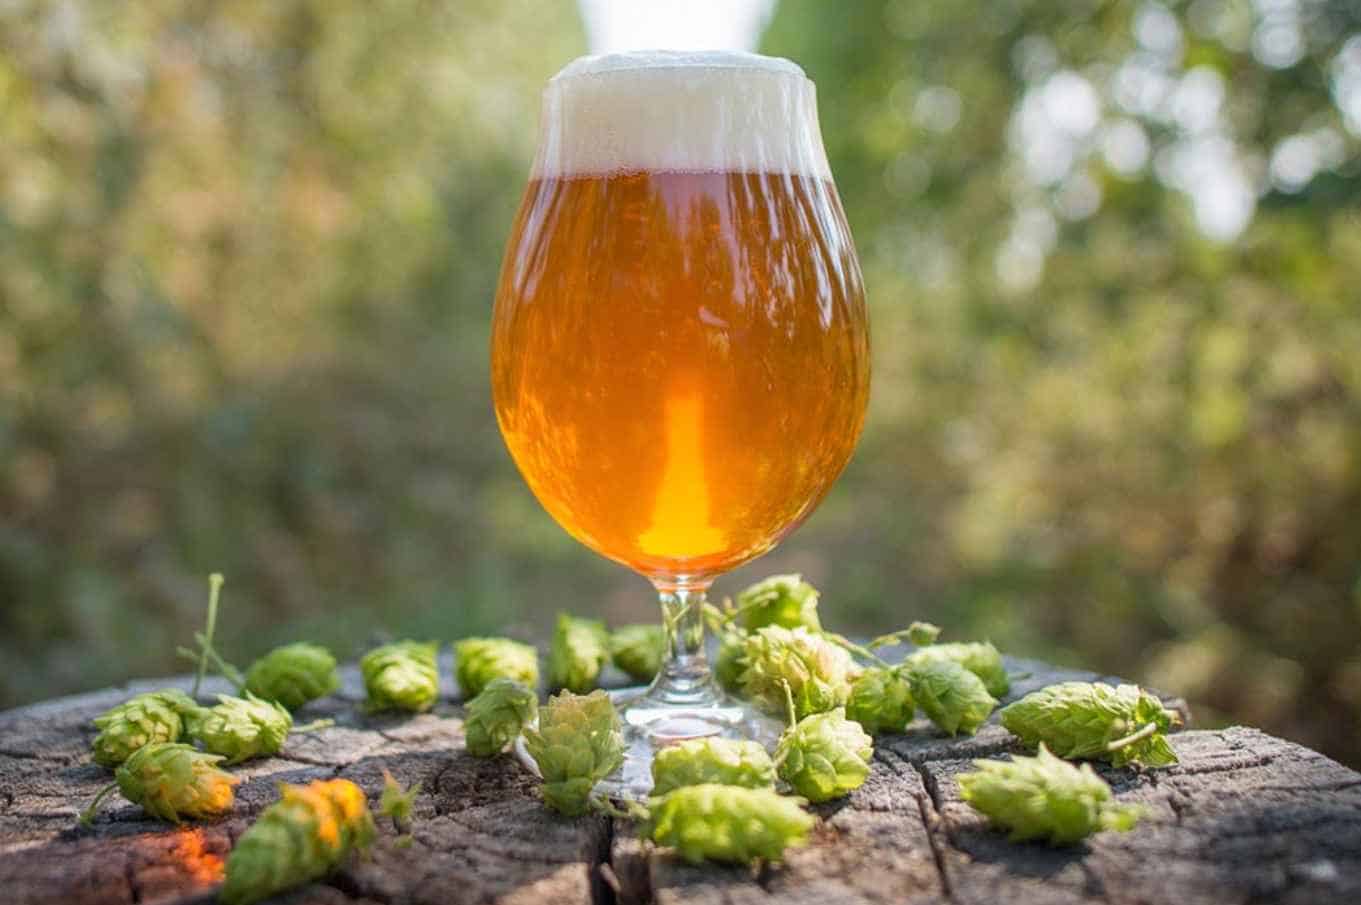 How Much Alcohol is in IPA Beer